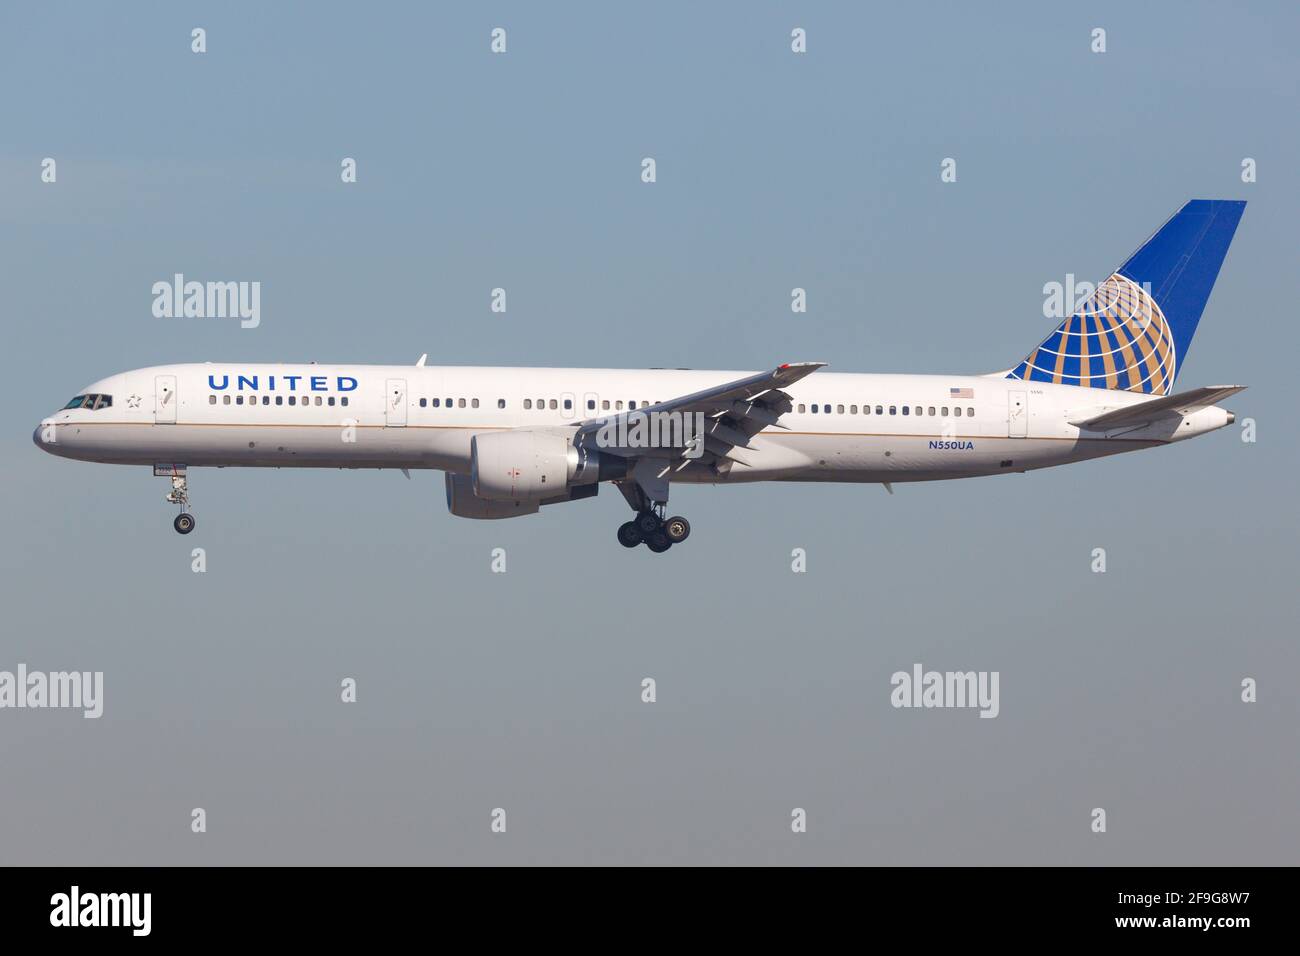 Los Angeles, USA - 22. February 2016: United Airlines Boeing 757-200 at Los Angeles airport (LAX) in the USA. Boeing is an aircraft manufacturer based Stock Photo